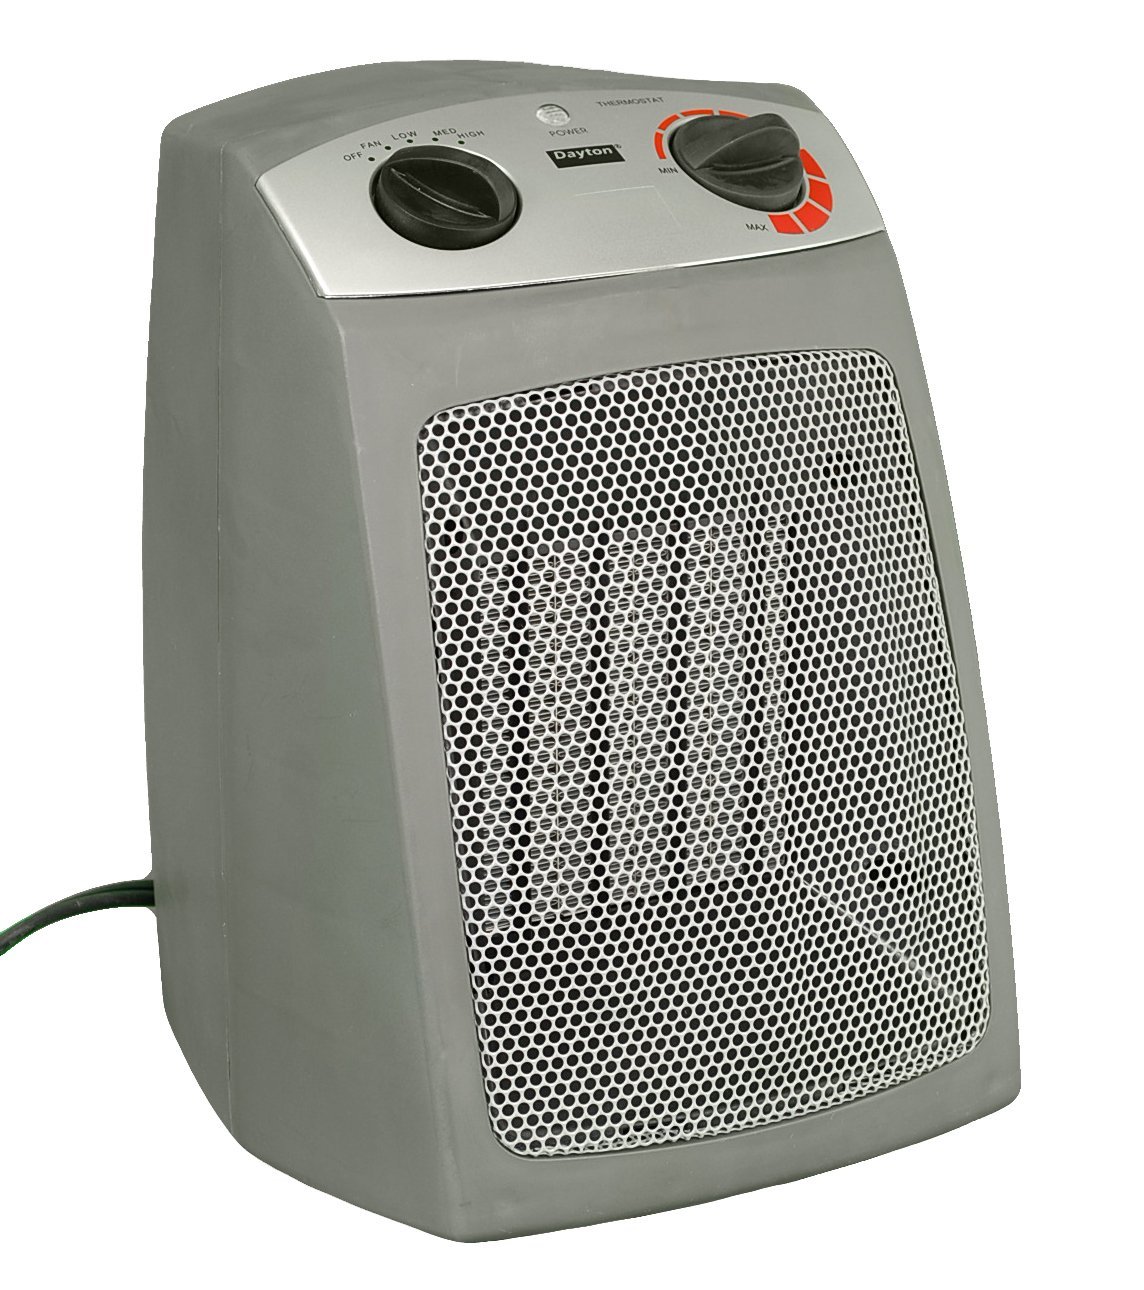 featured image - Is the Electric Heater Efficient